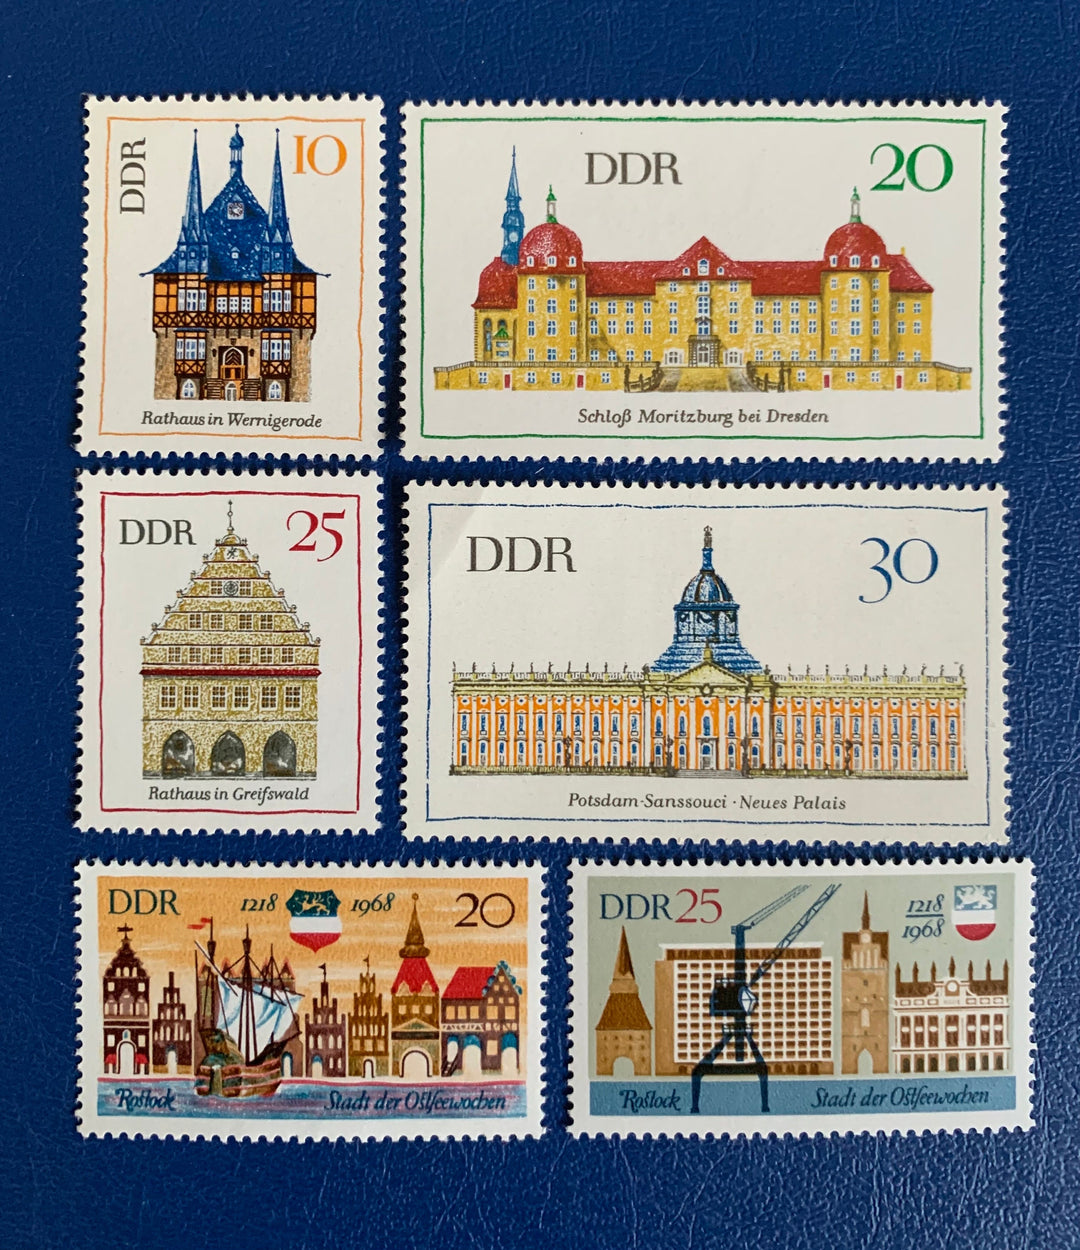 Germany (DDR) - Original Vintage Postage Stamps- 1968 Historical Buildings & Rostock - for the collector, artist or crafter